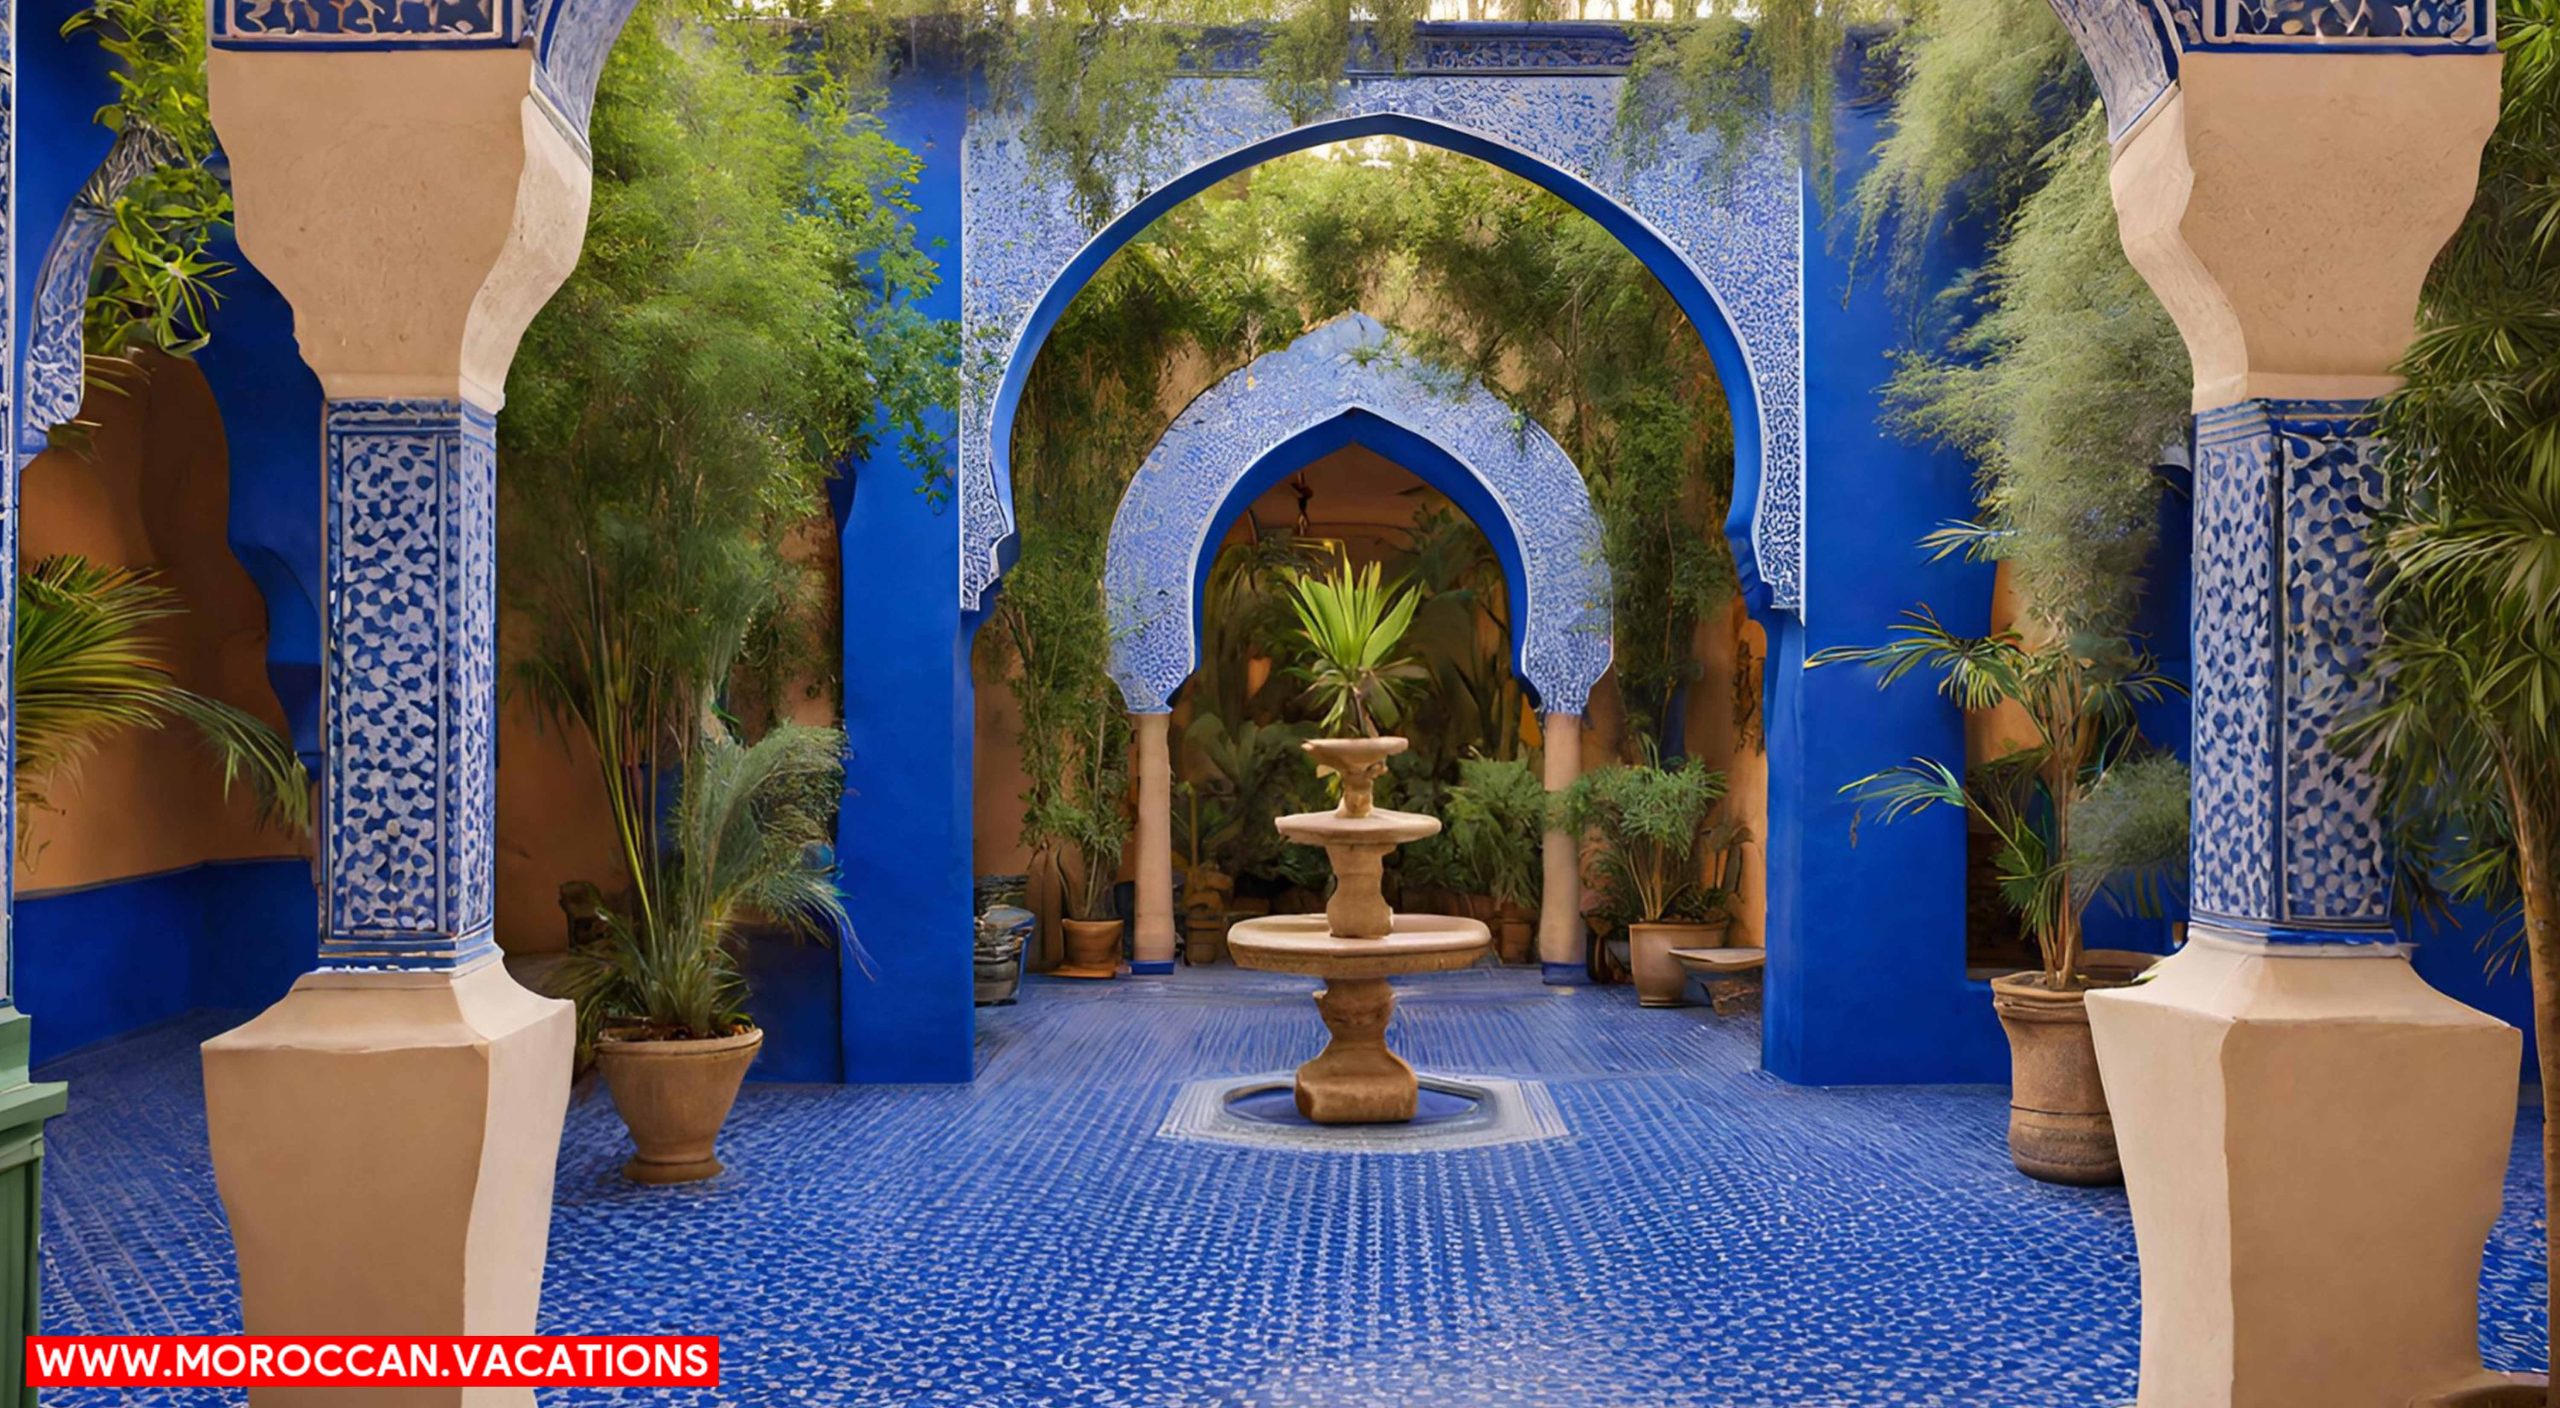 The vibrant symphony of cobalt blue and lush greenery at the Majorelle Garden.